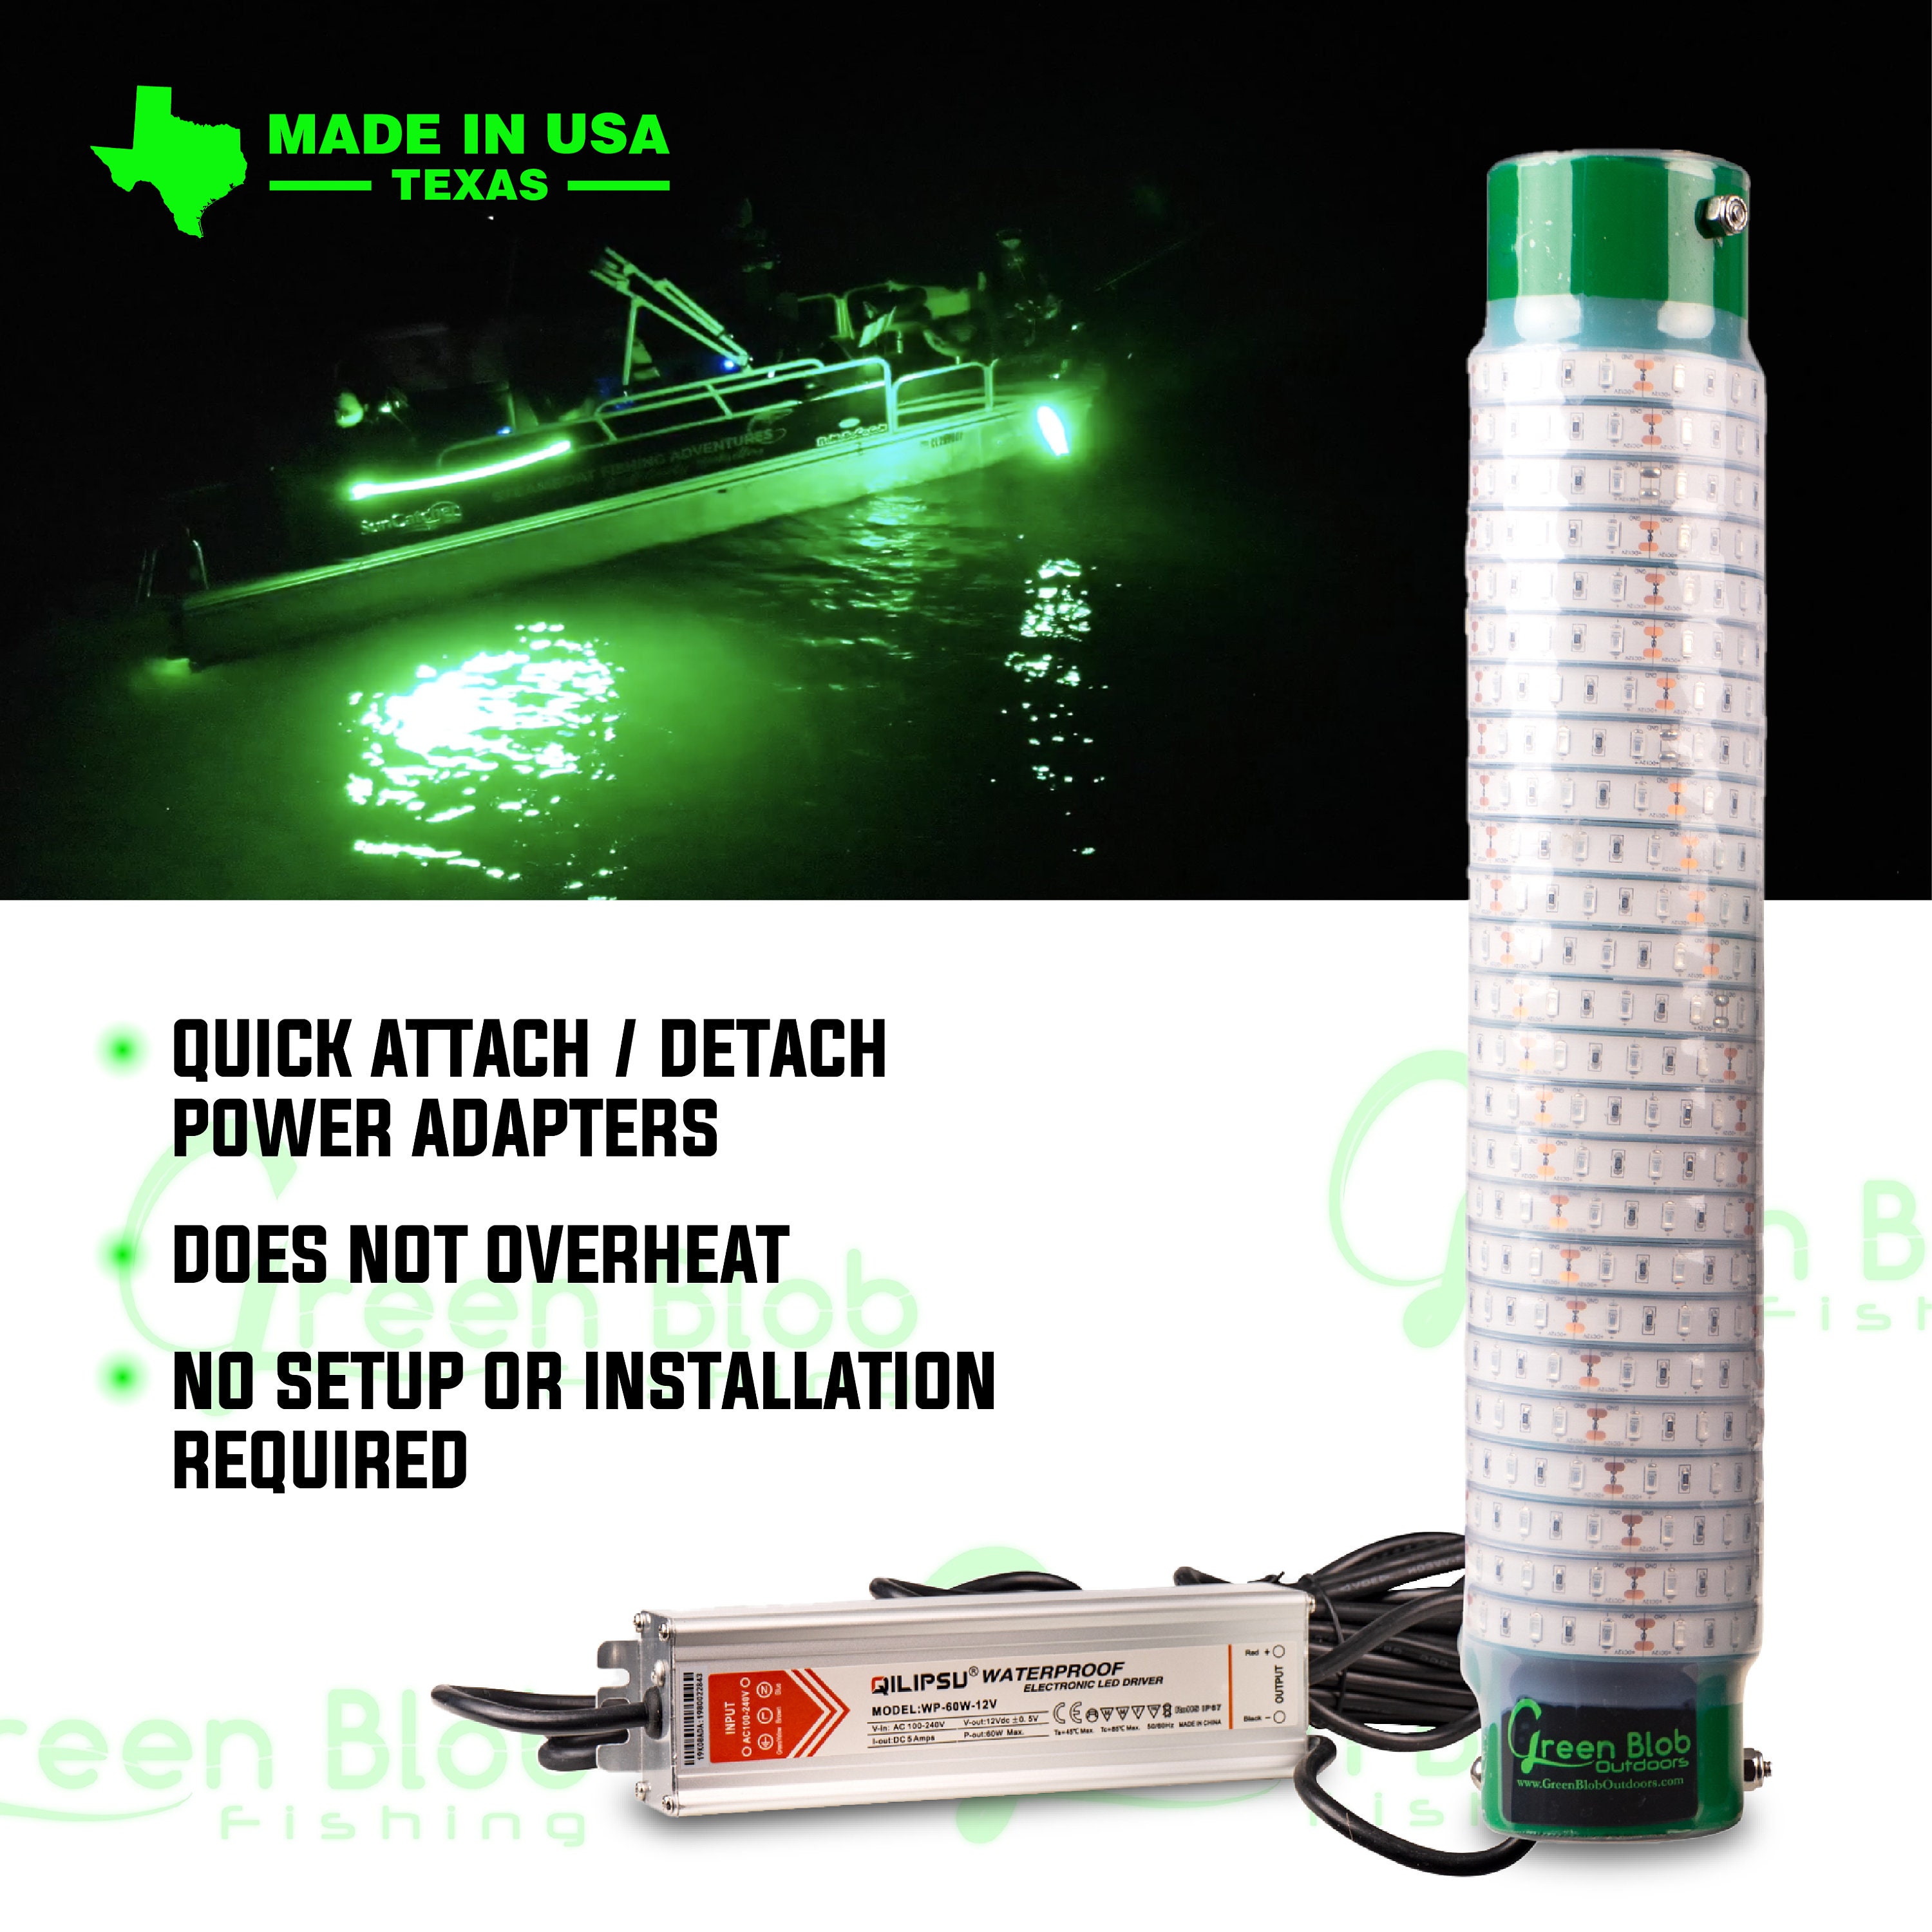 110v Maxx Submersible Green underwater LED fishing crappie Light